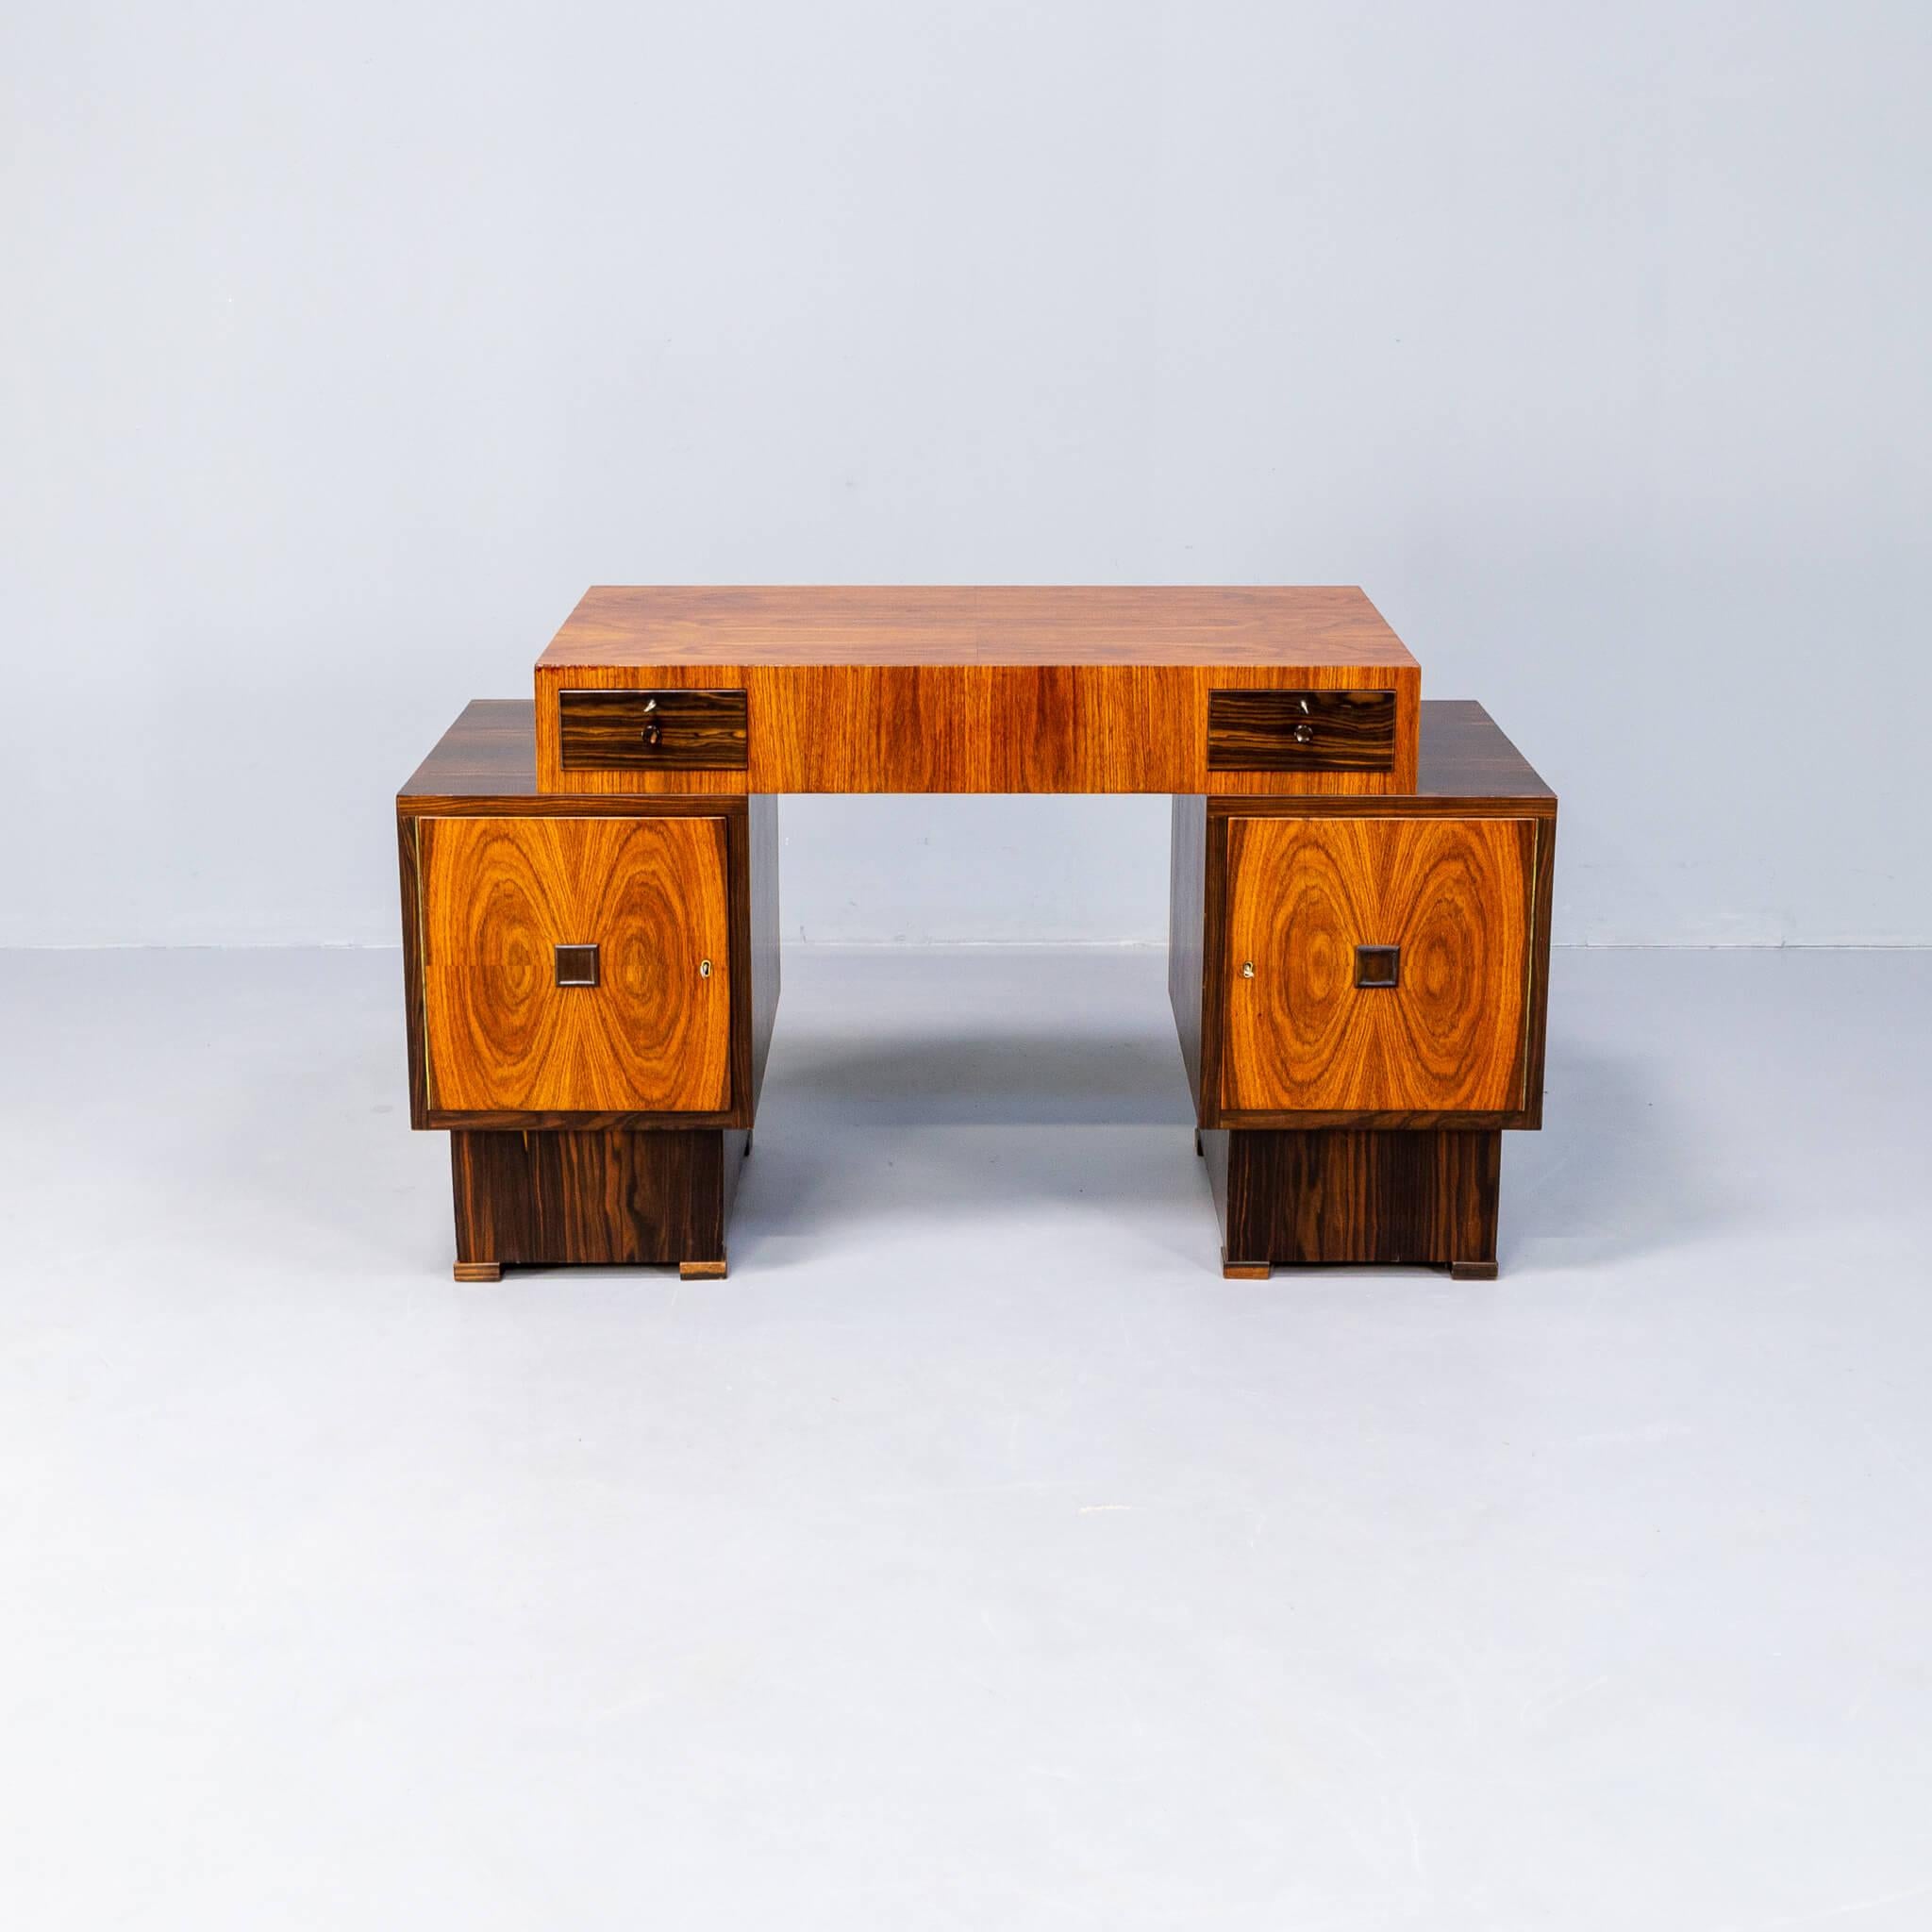 Dutch Anton Hamaker Art Deco Writing Desk from the Amsterdam School for ‘t Woonhuys For Sale